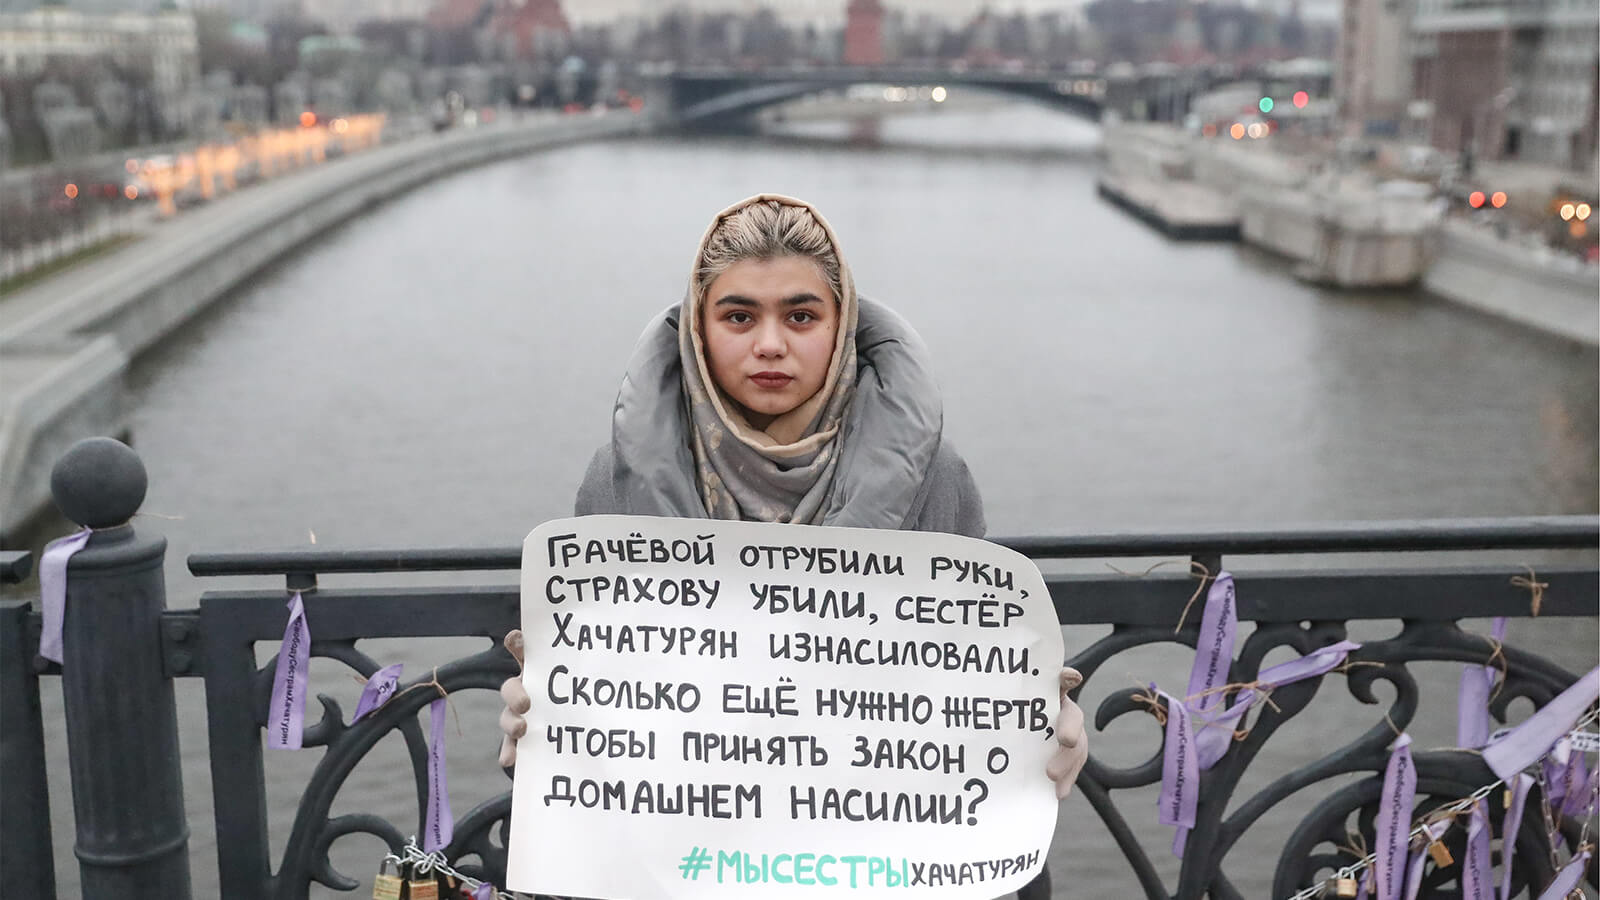 A woman holds a placard with a message reading "Gracheva had her hands cut off. Strakhova was killed. Khachaturyan sisters were raped. How many victims do we need to pass a bill on domestic violence?" during a one-person protest on Patriarshy Bridge in Moscow